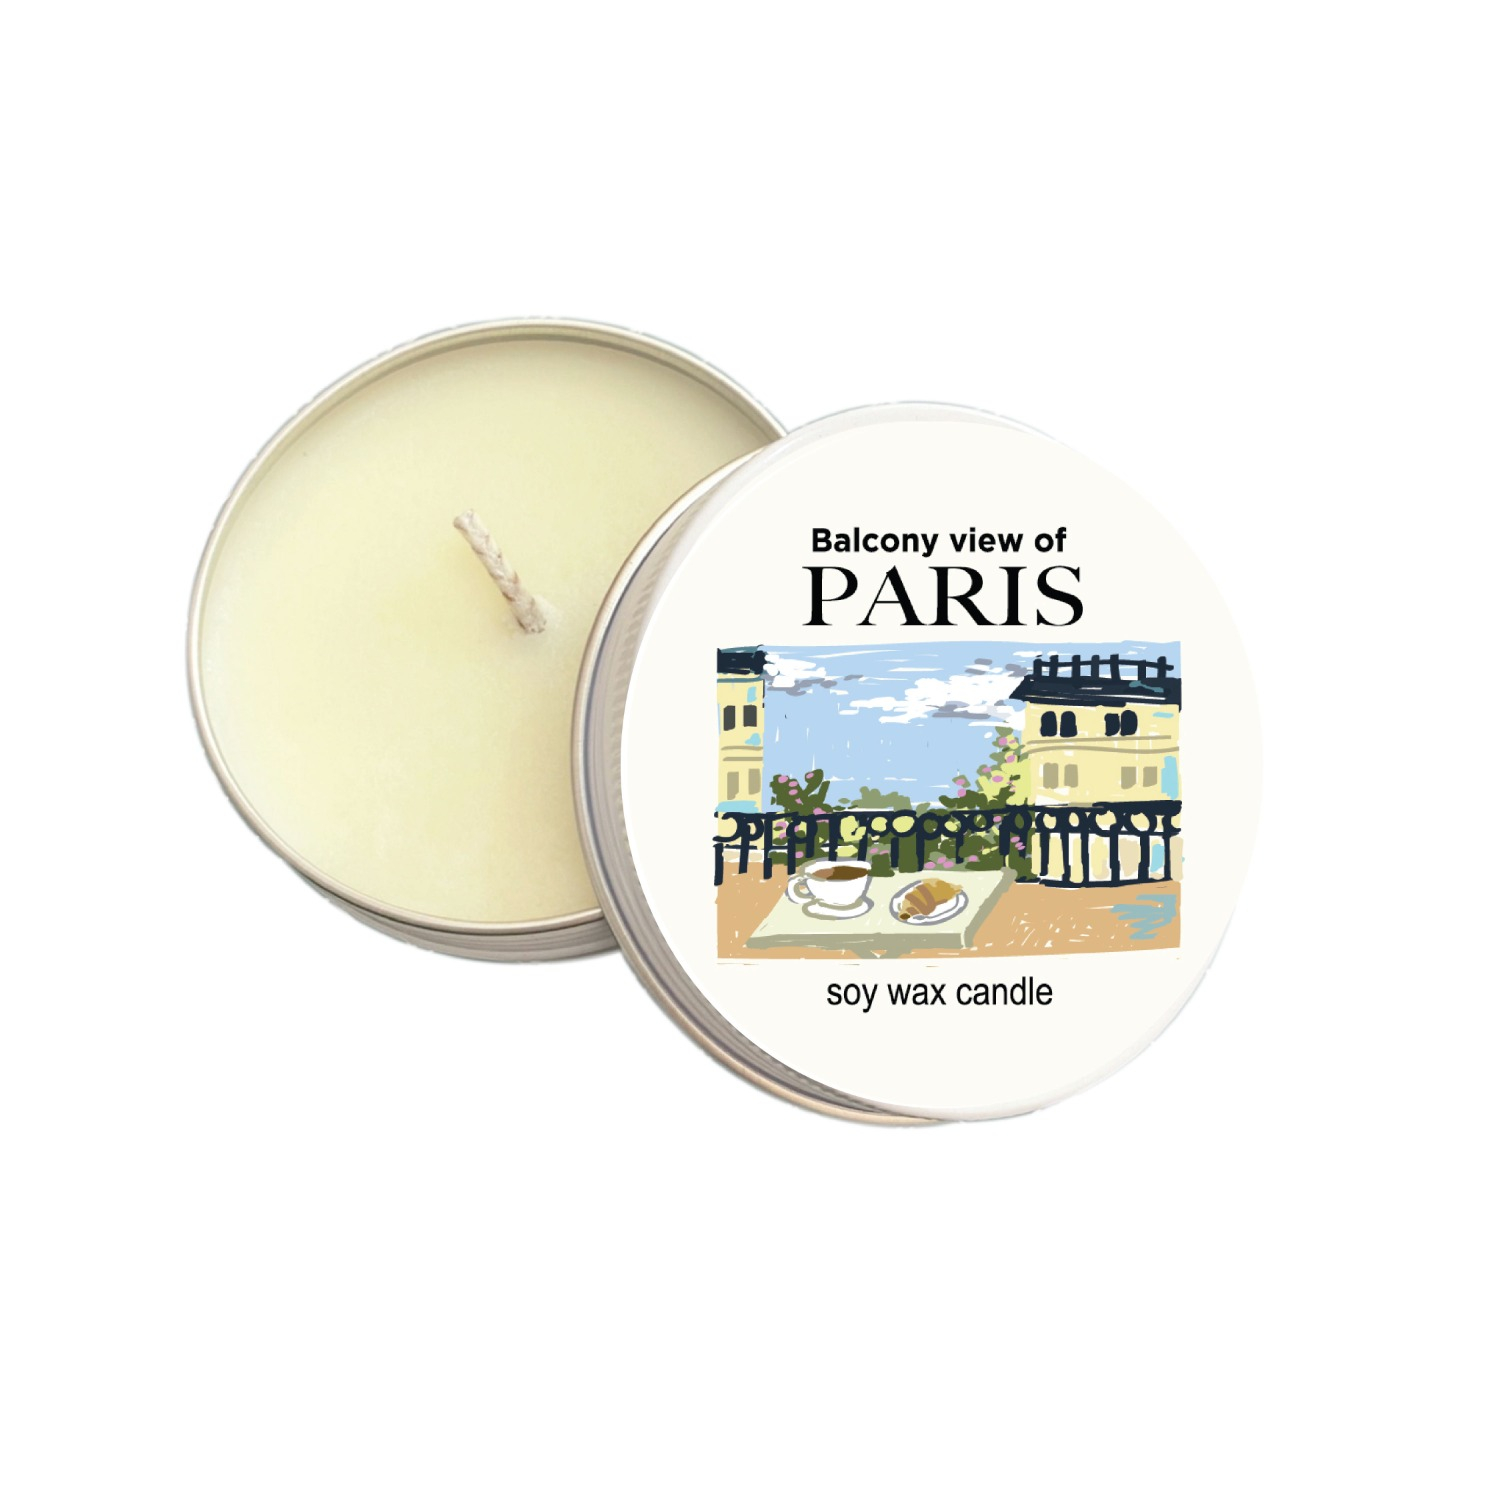 Balcony view of Paris Soy candles